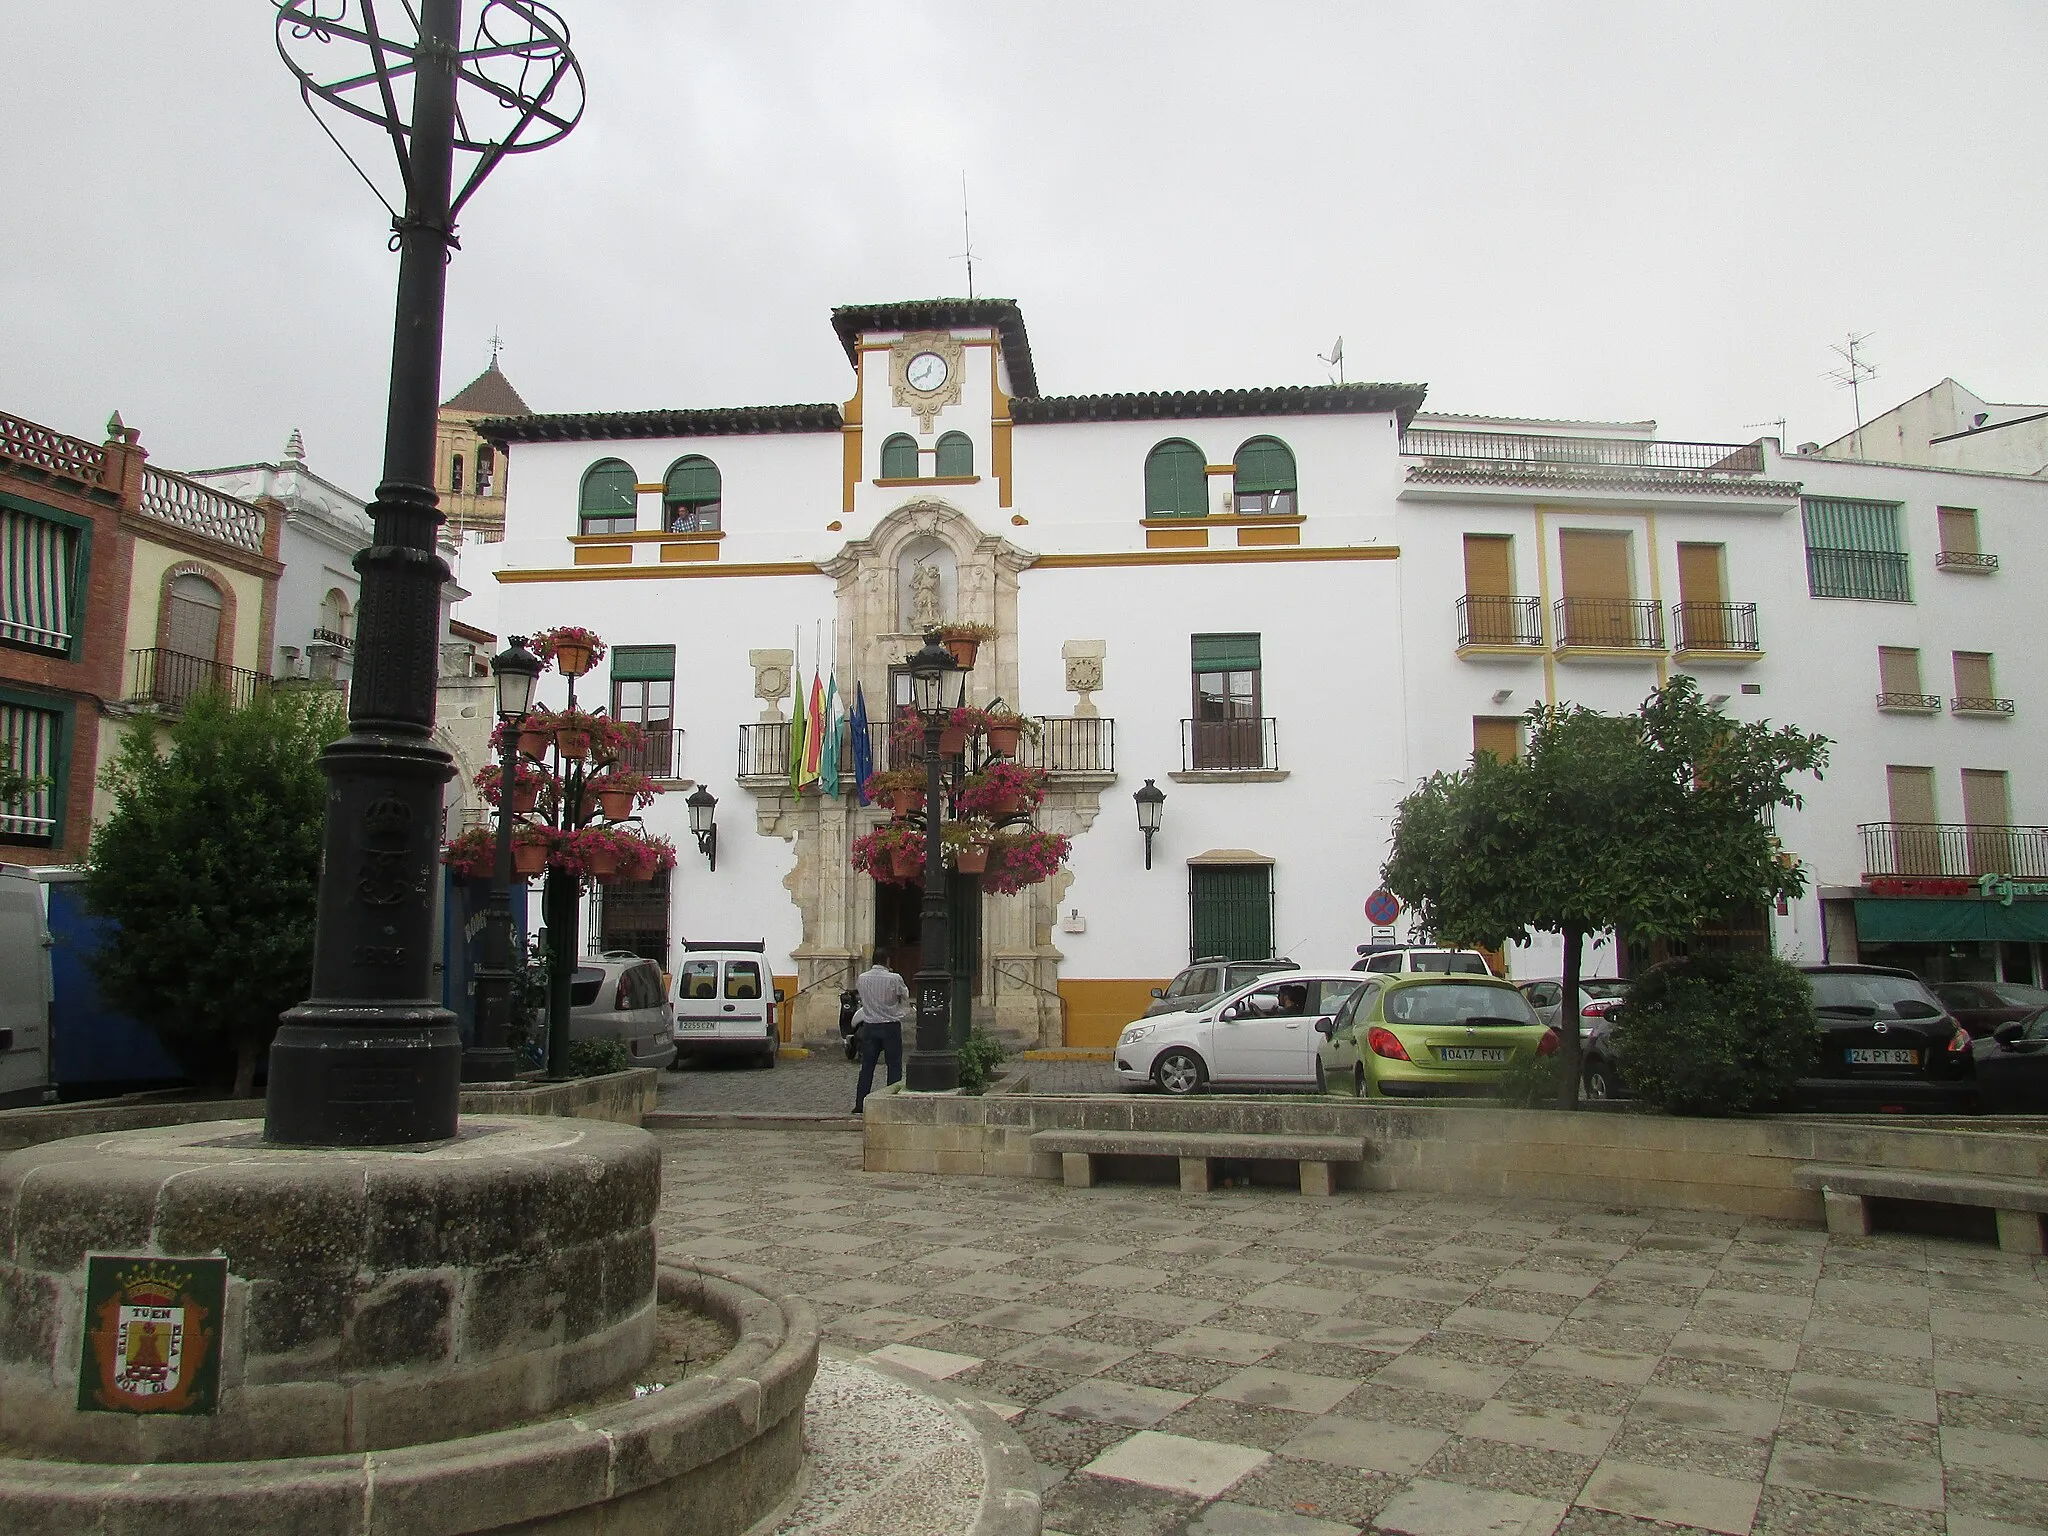 Photo showing: The town hall located on Plaza Veintiocho de Febrero within the town of Alcaudete, Jaén, Andallusia, Spain.